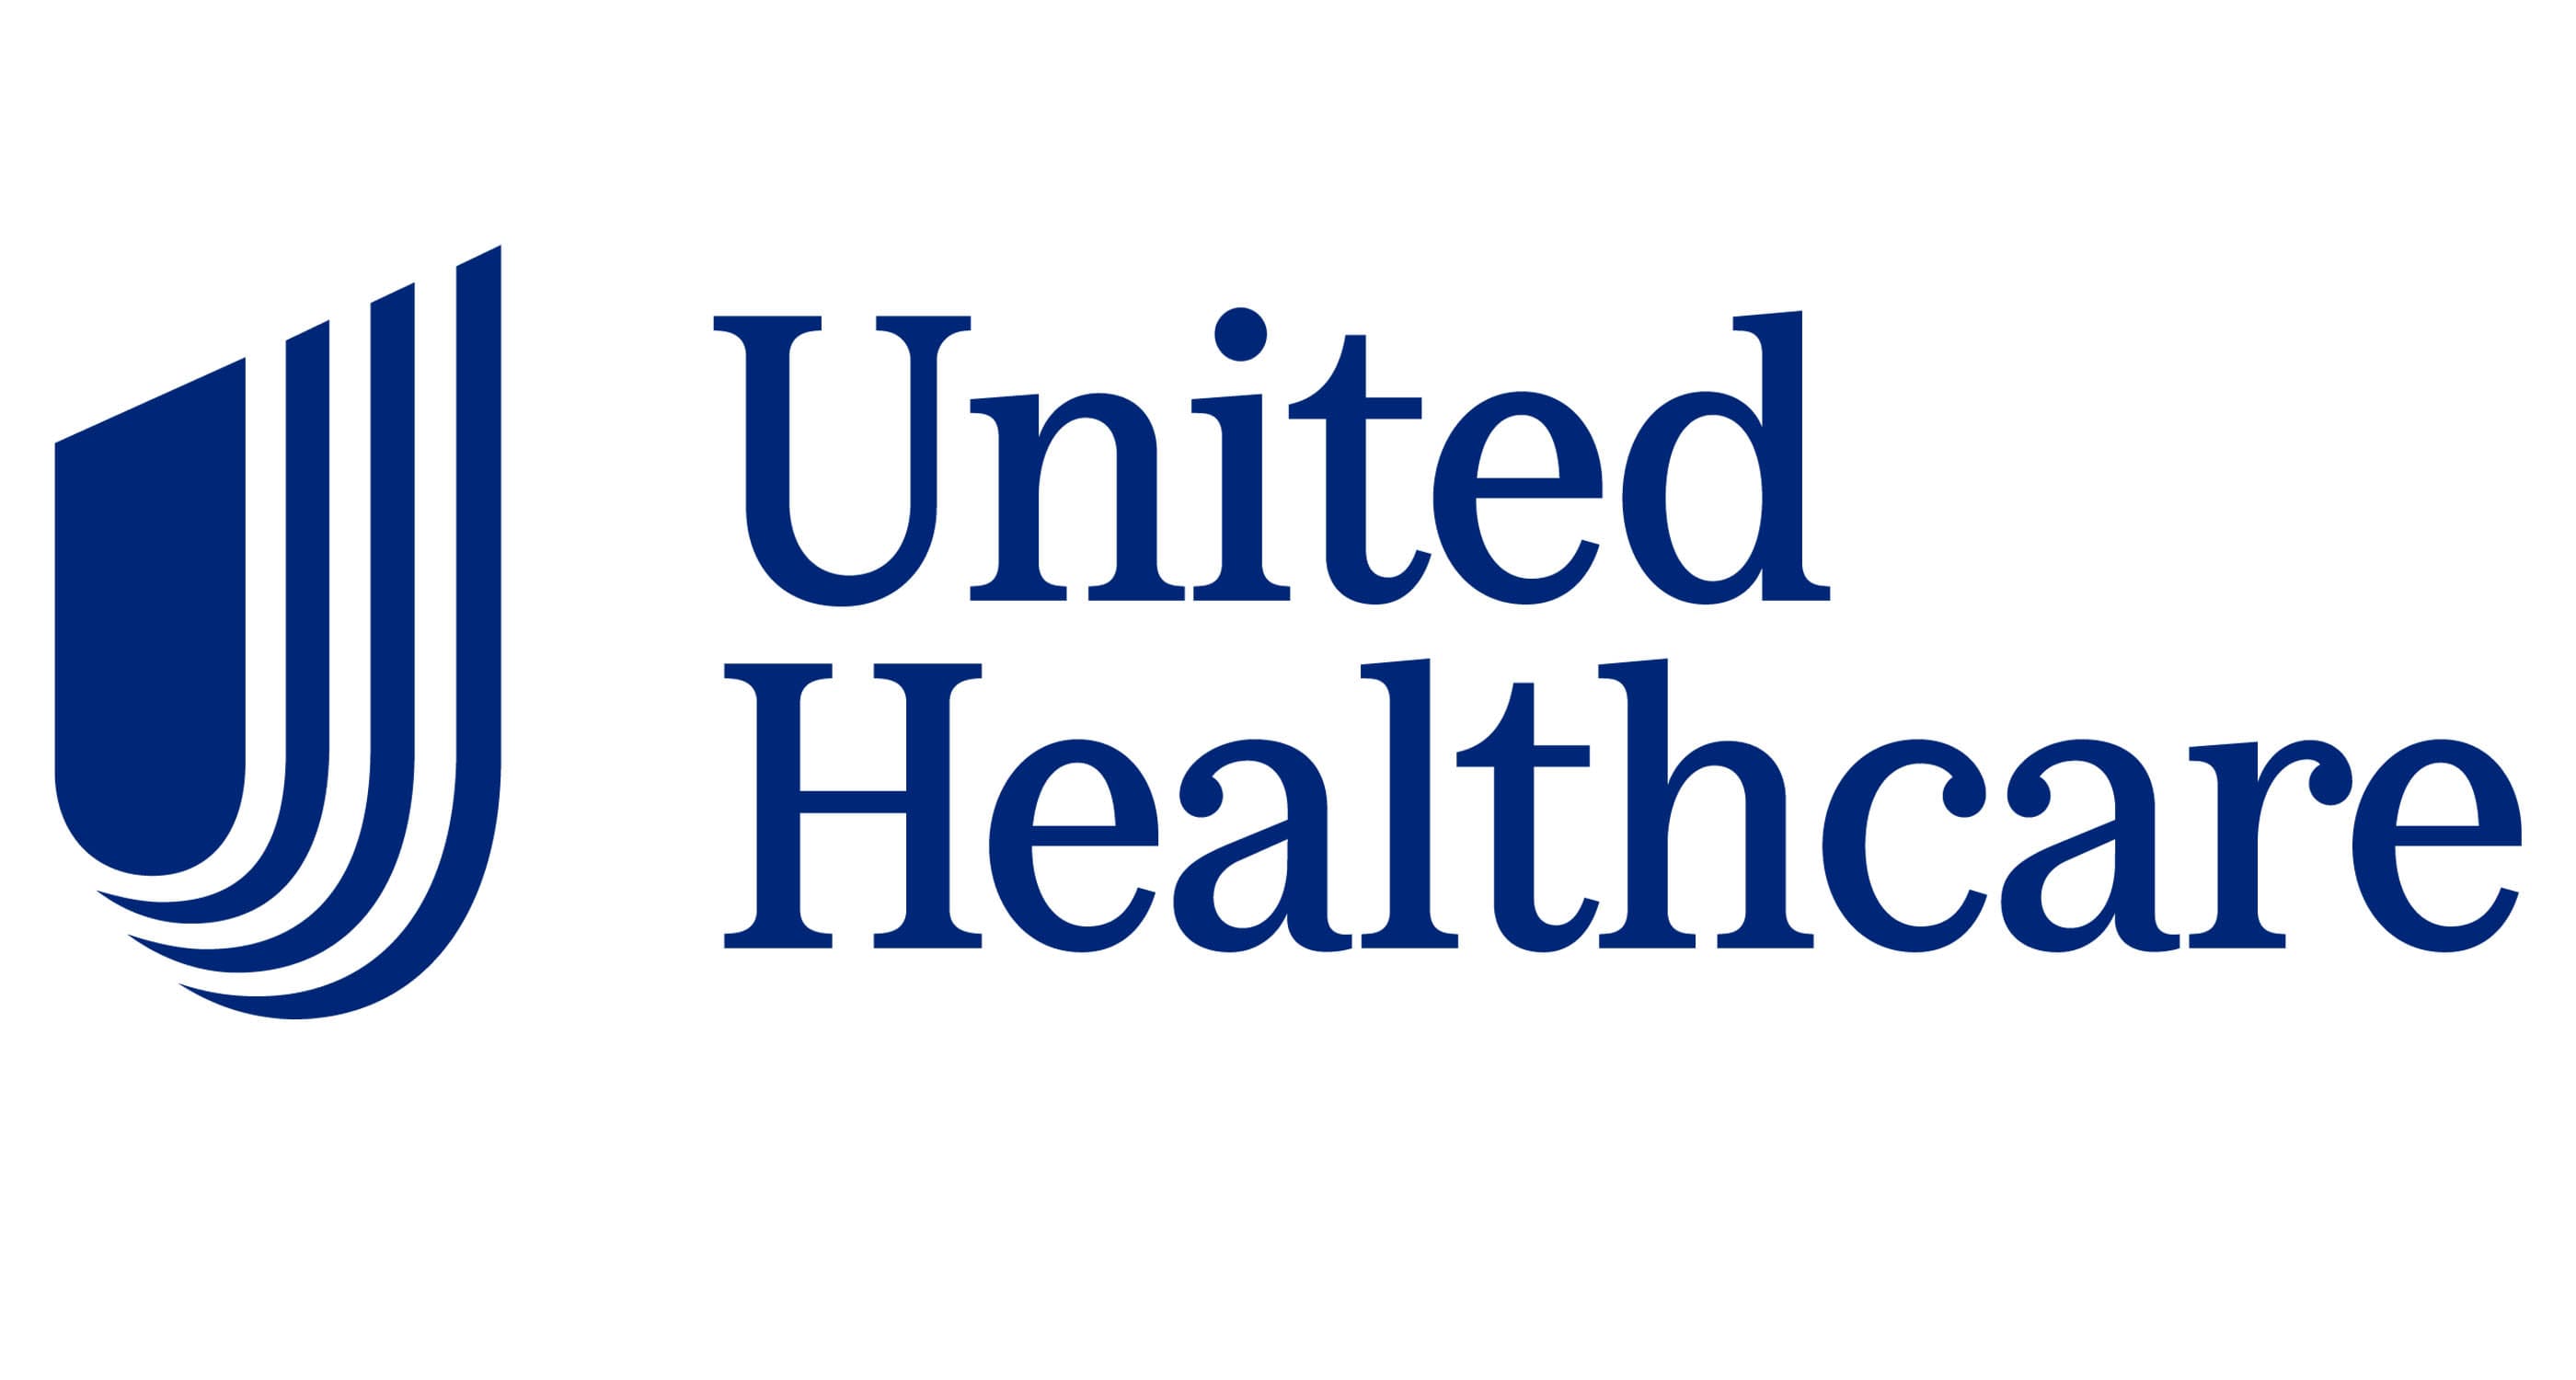 16-facts-about-unitedhealthcare